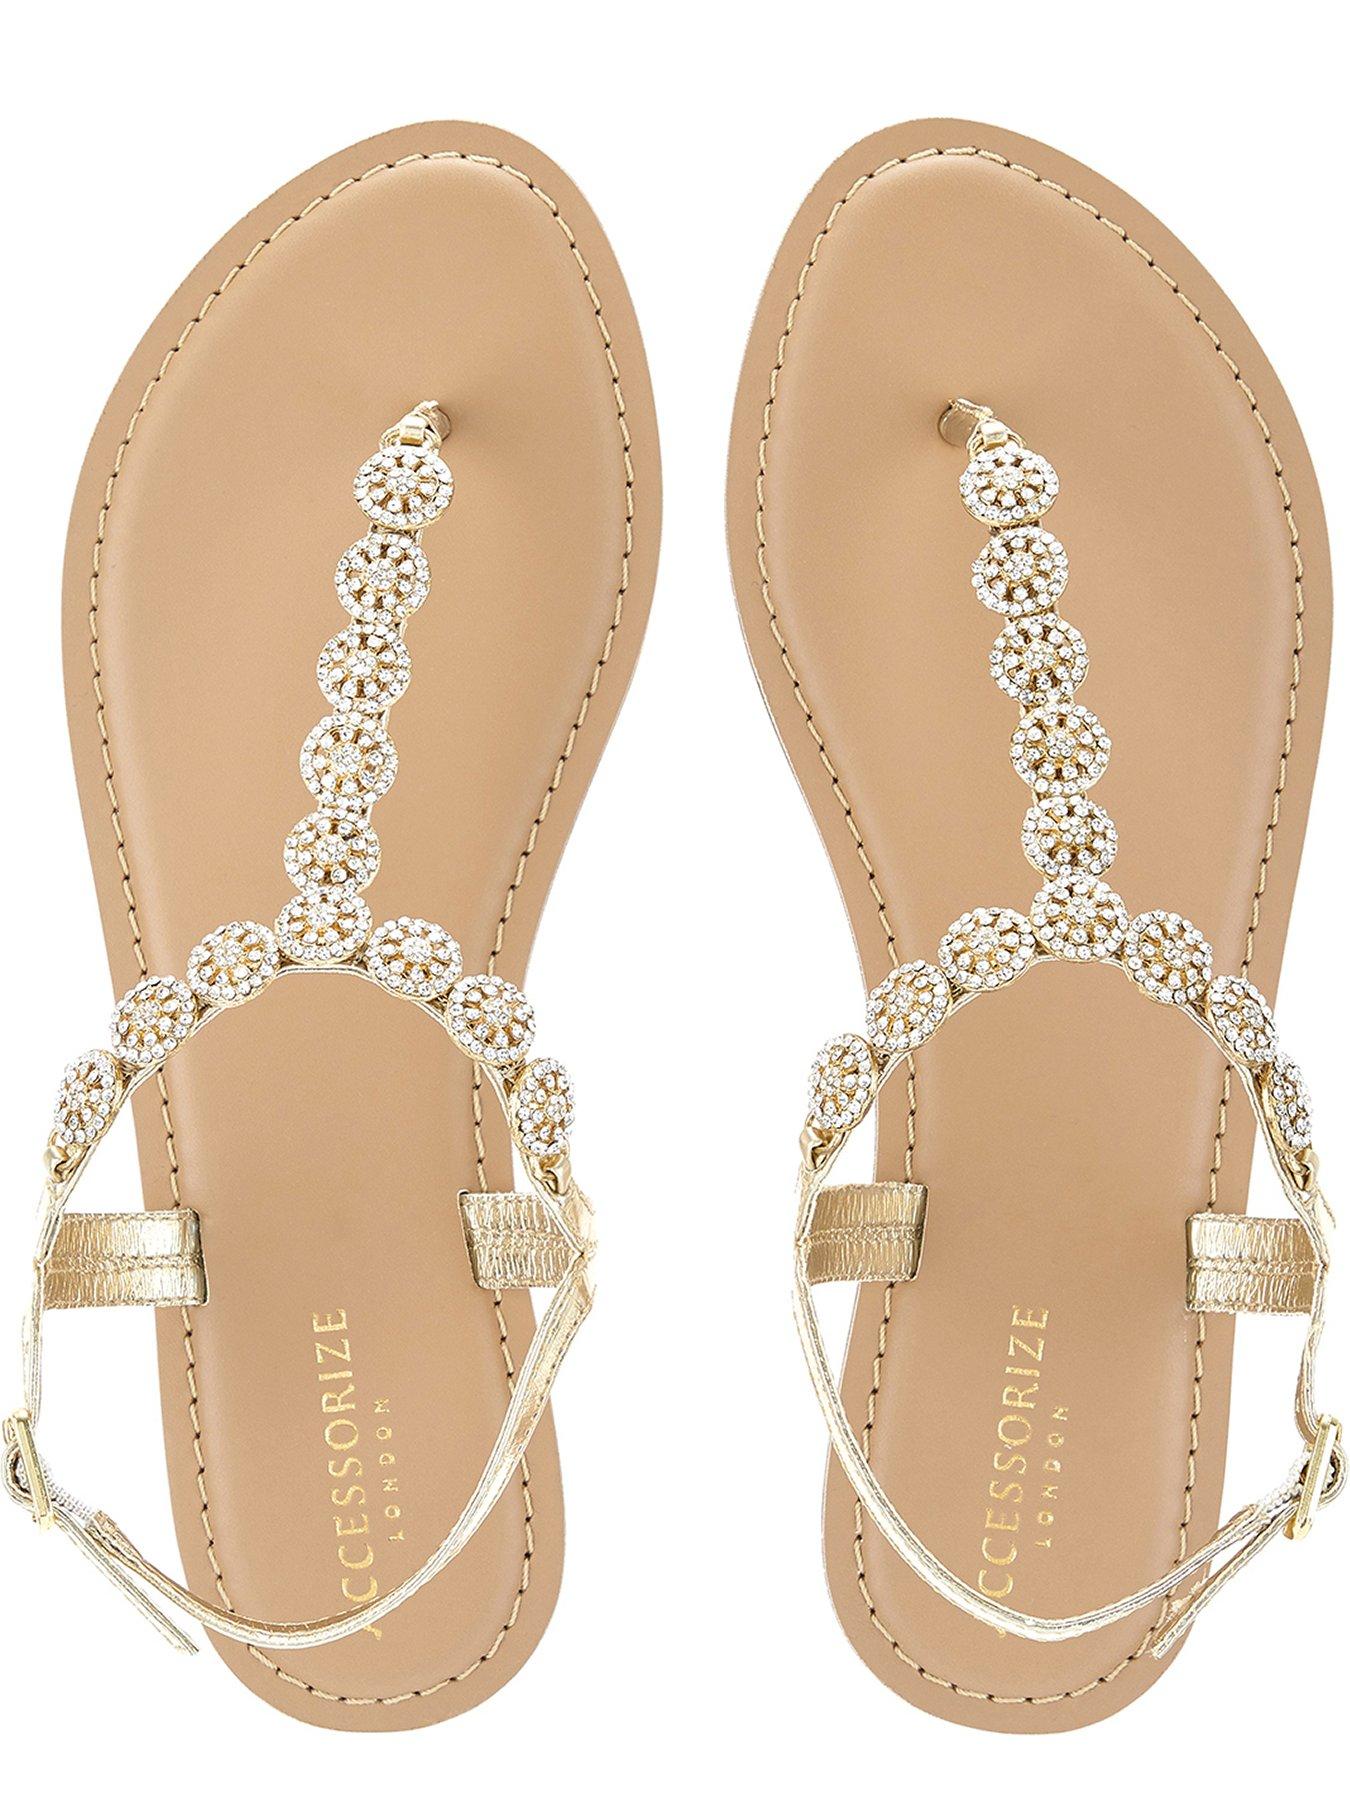 Shoes & boots Rome Embellished Sandal - Silver